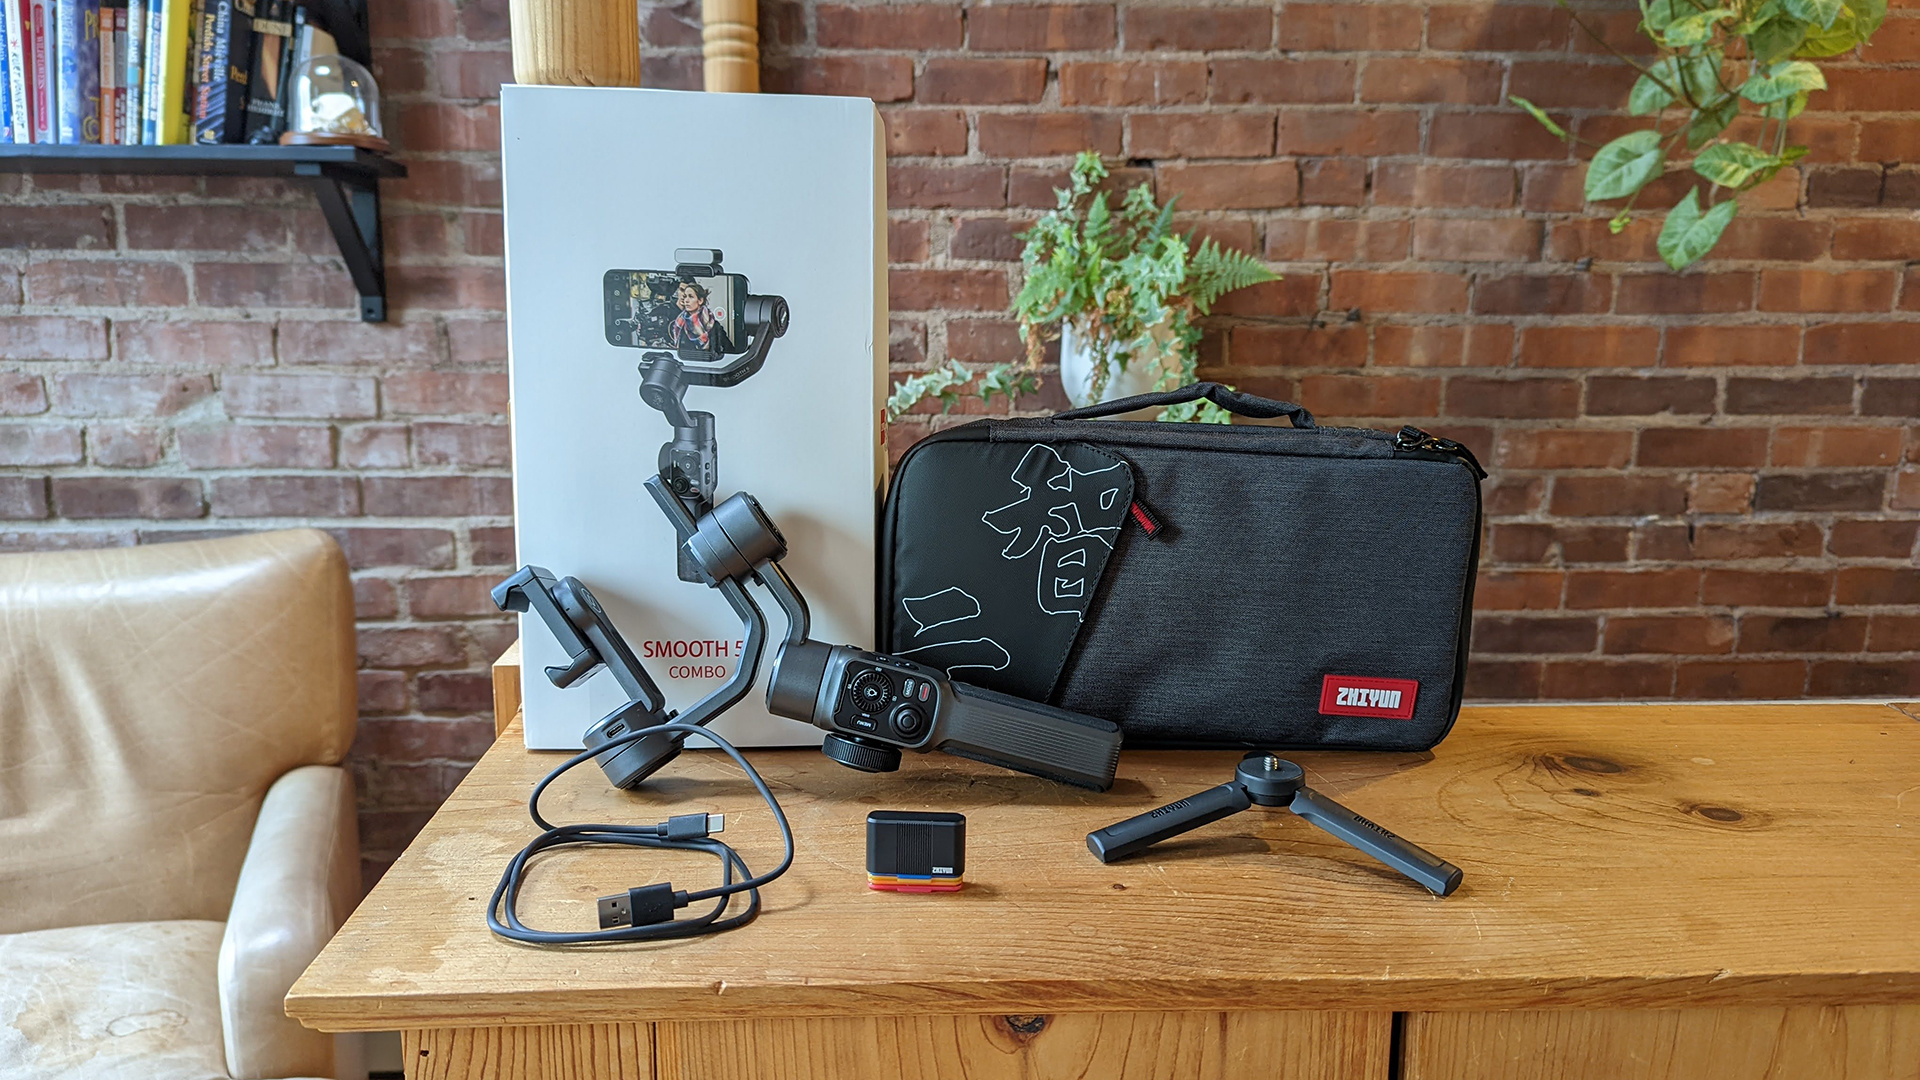 Zhiyun Smooth 5 Review Retail Box Contents